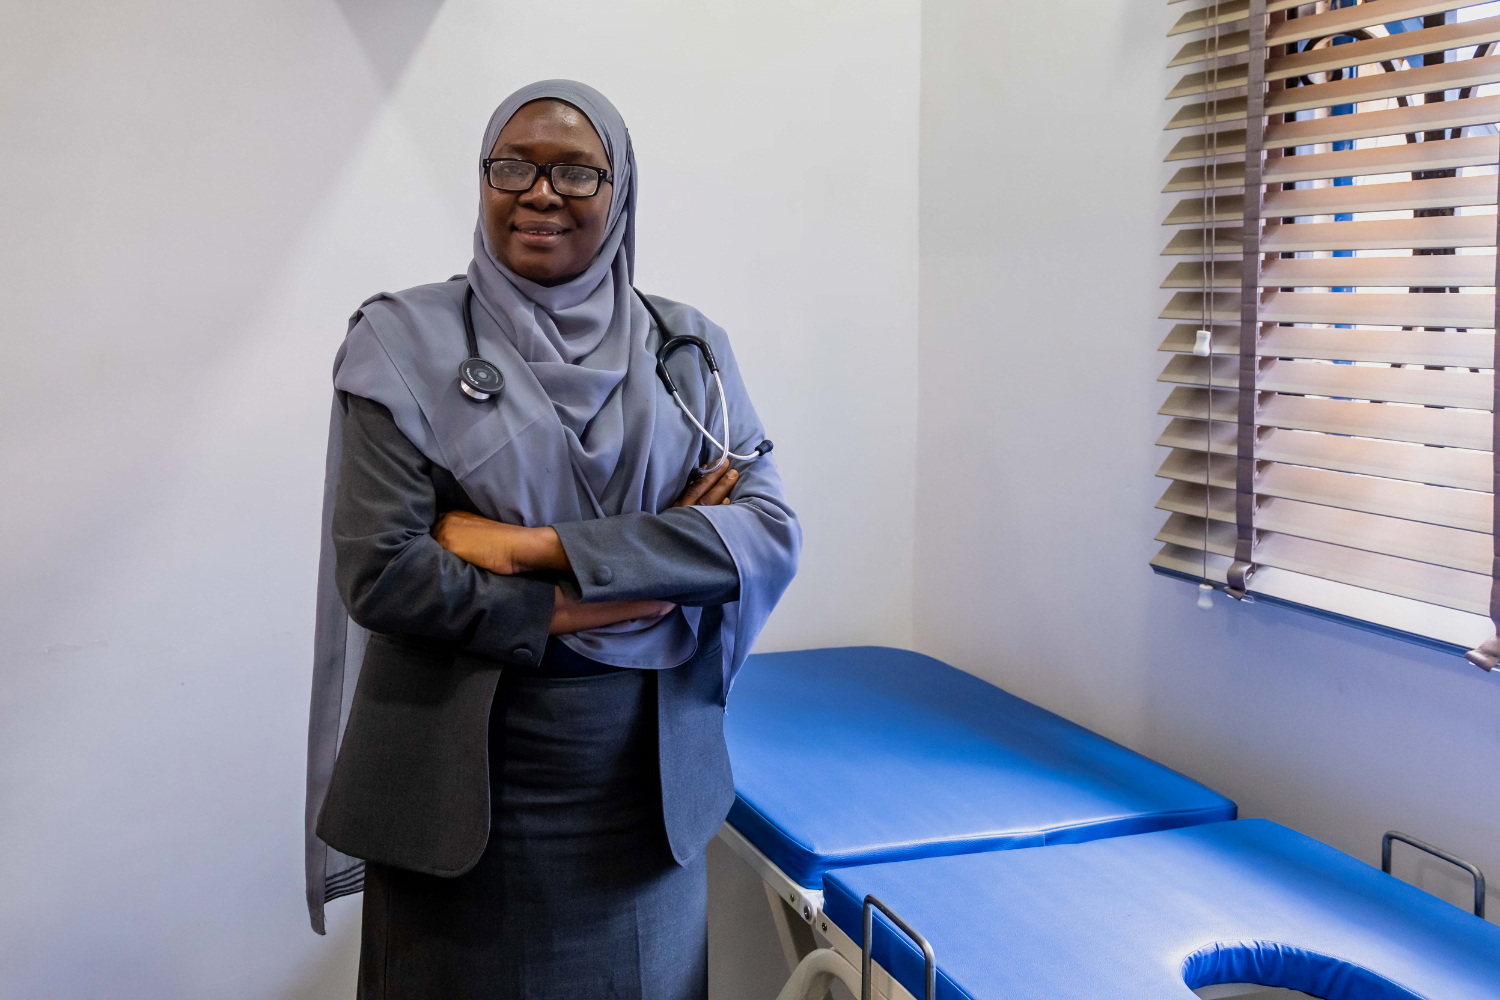 Dr. Hajara Yusuf poses in front of a patient bed at her hospital